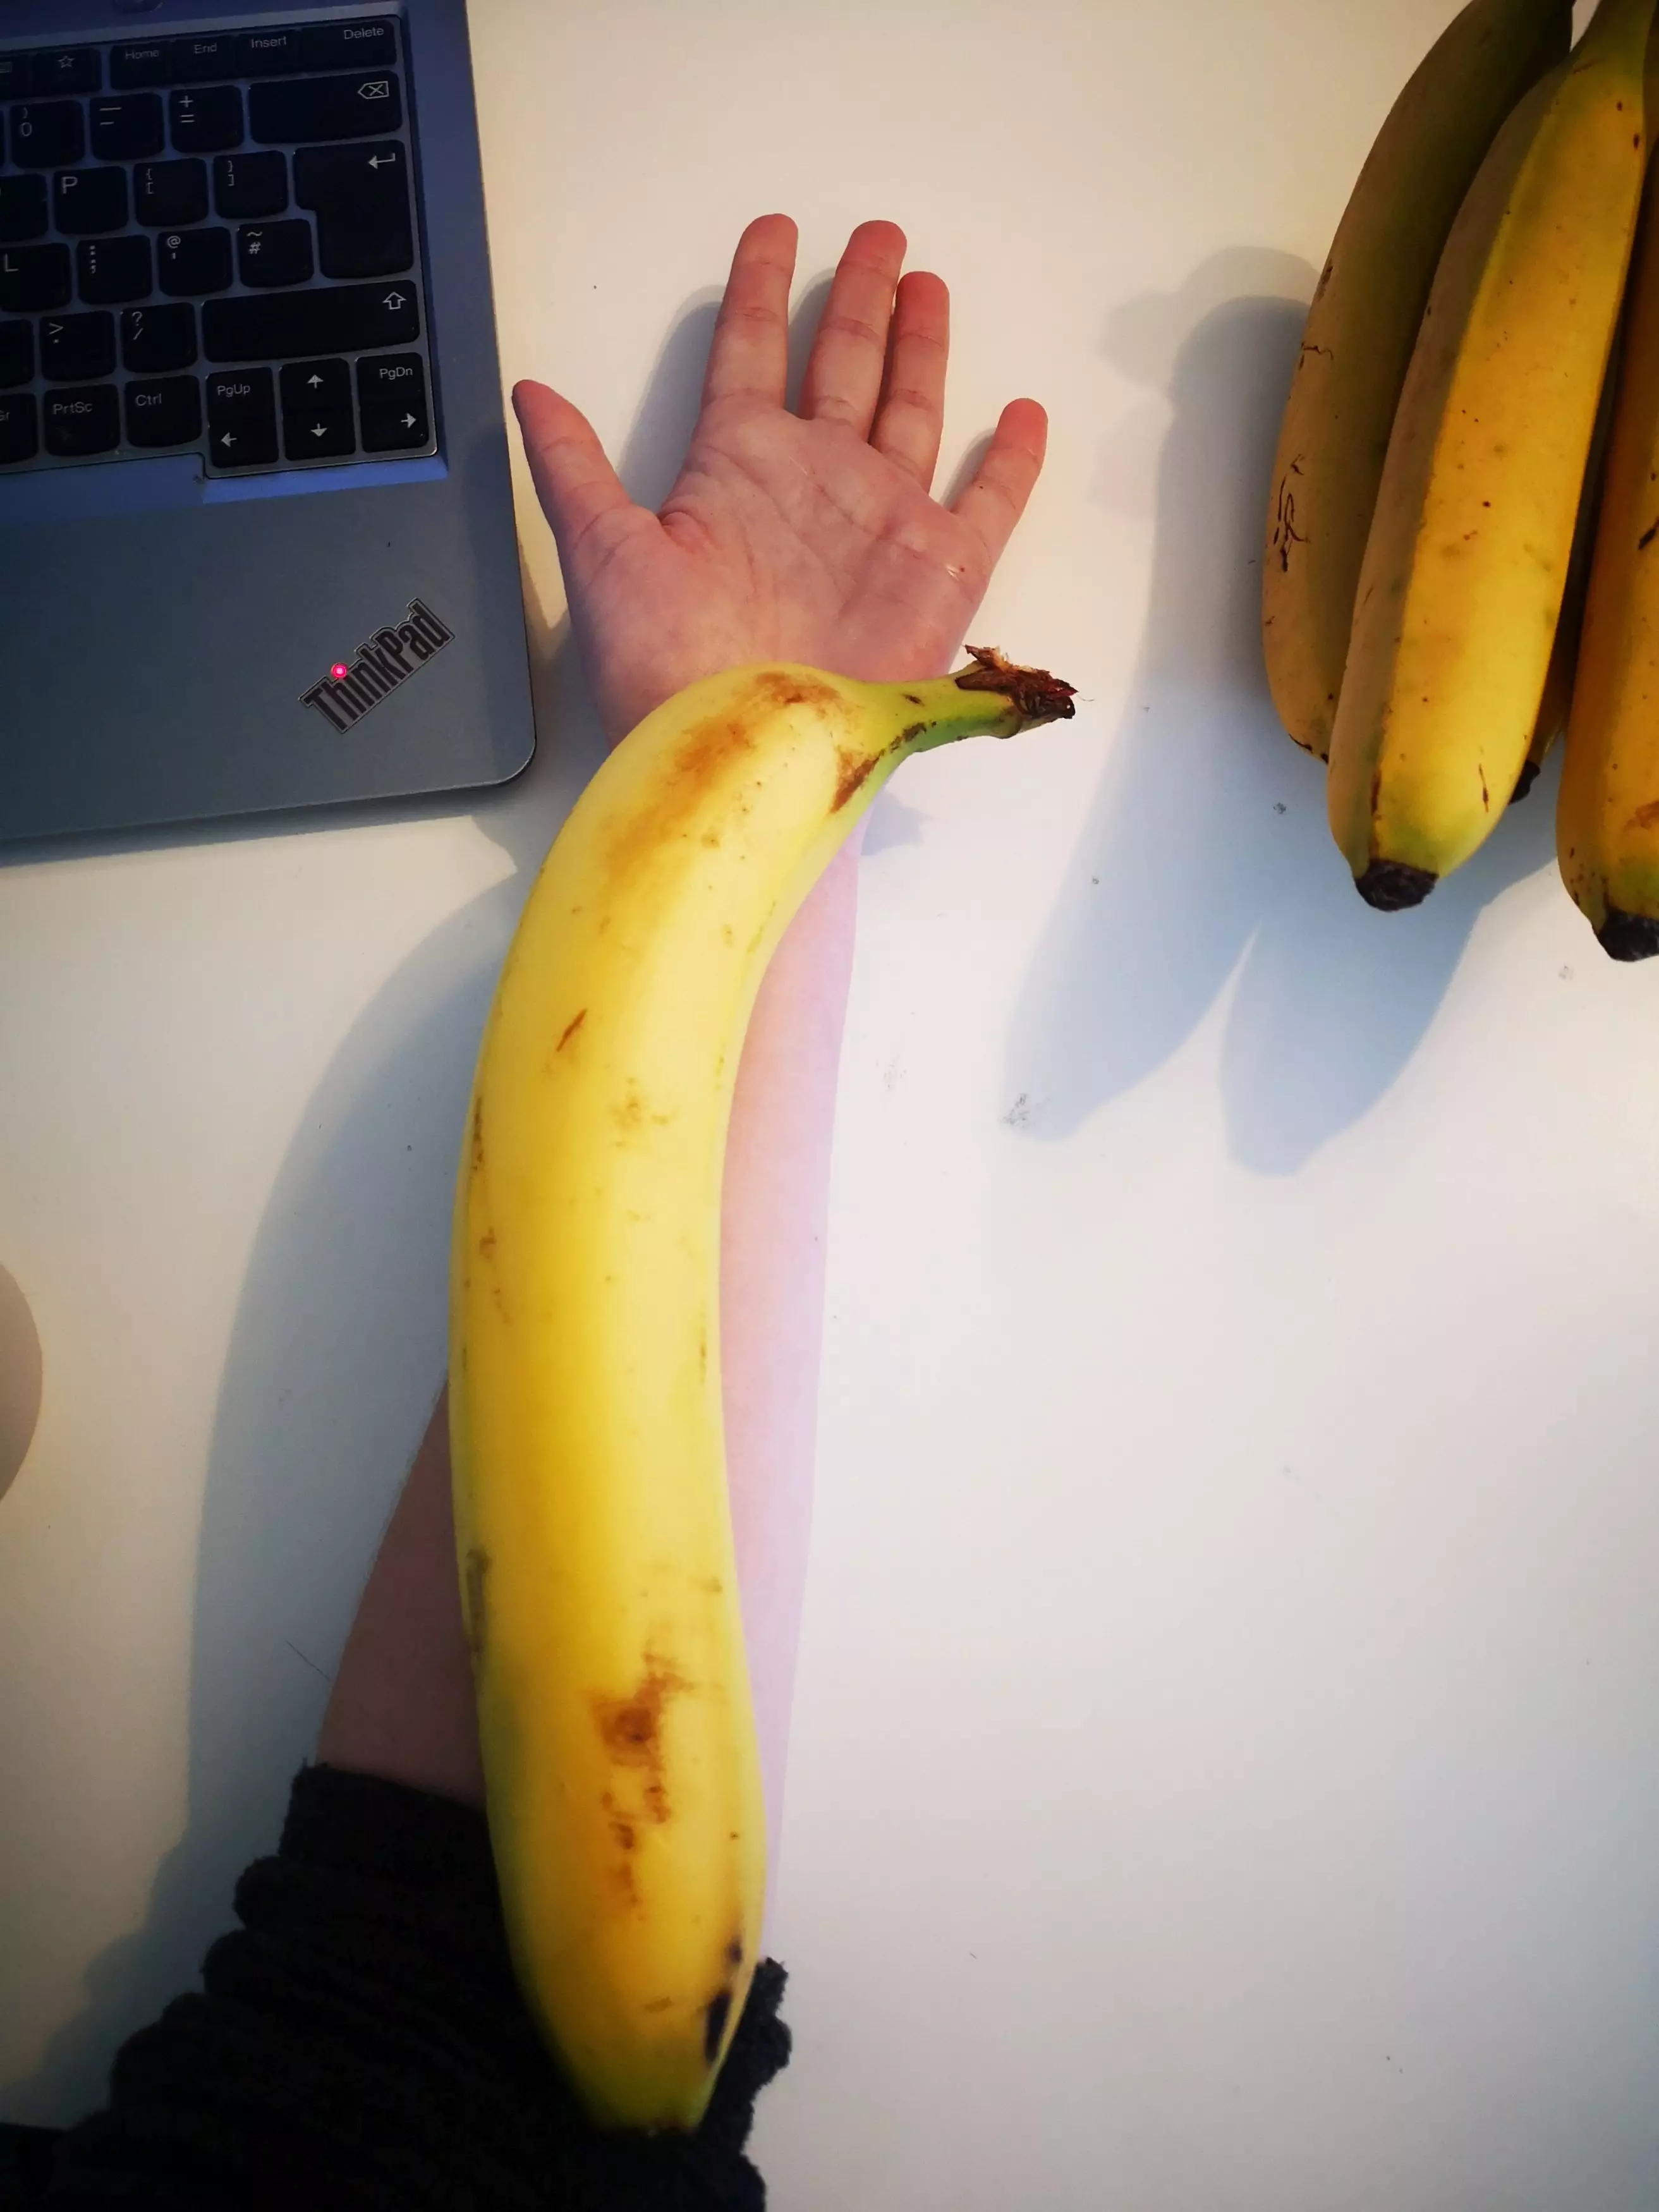 The 31-year-old said it was the most delicious banana she's ever eaten.